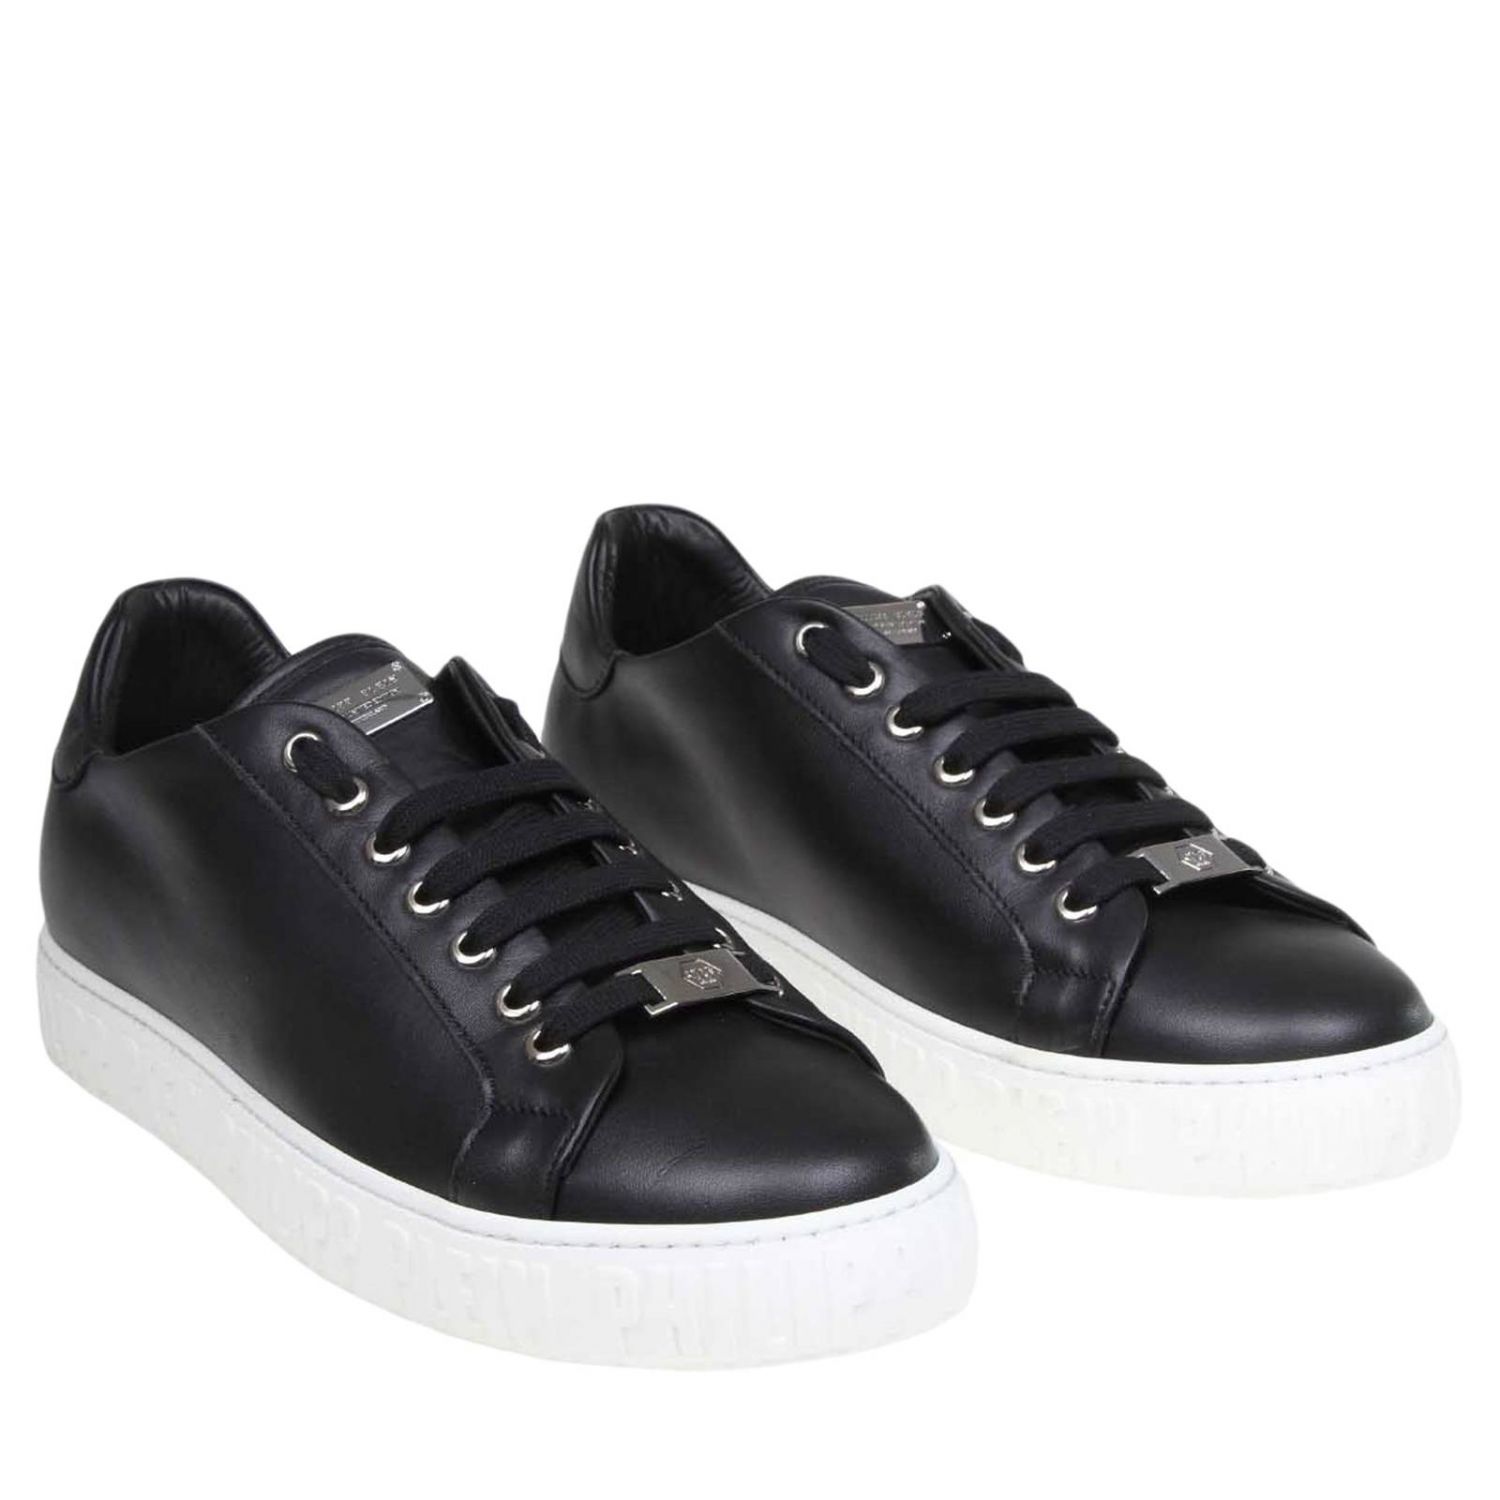 Philipp Plein Outlet: Lace-up sneakers in leather with maxi skull ...